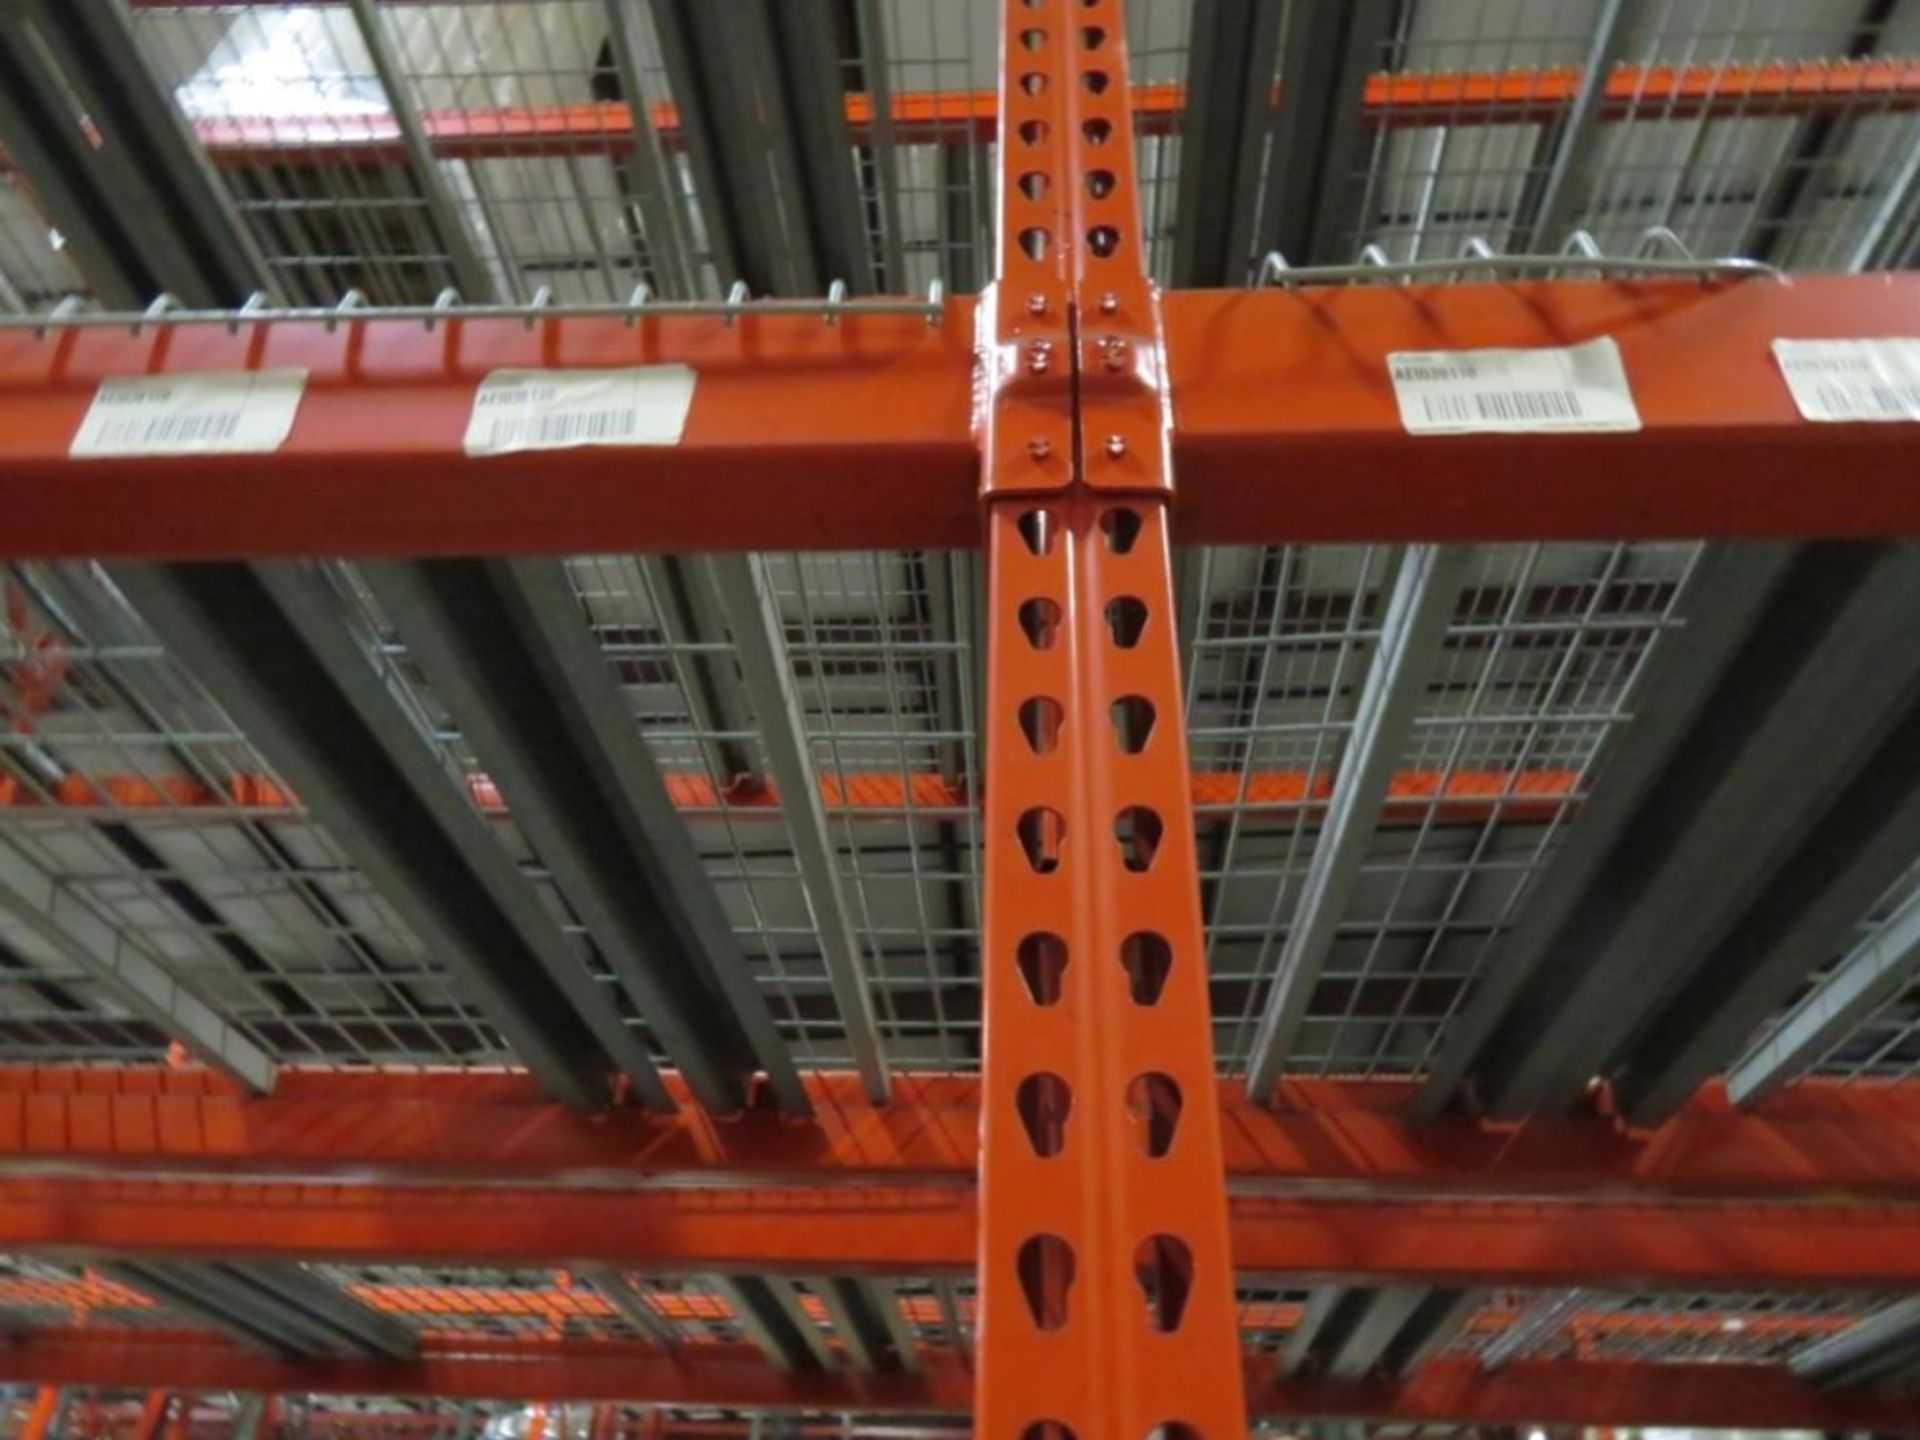 Paltier Pallet Racking 12 uprights 3"x 2 3/4", 42" wide and 18' tall, 66 beams 4 1/2 "x 2 3/4" & - Image 7 of 7